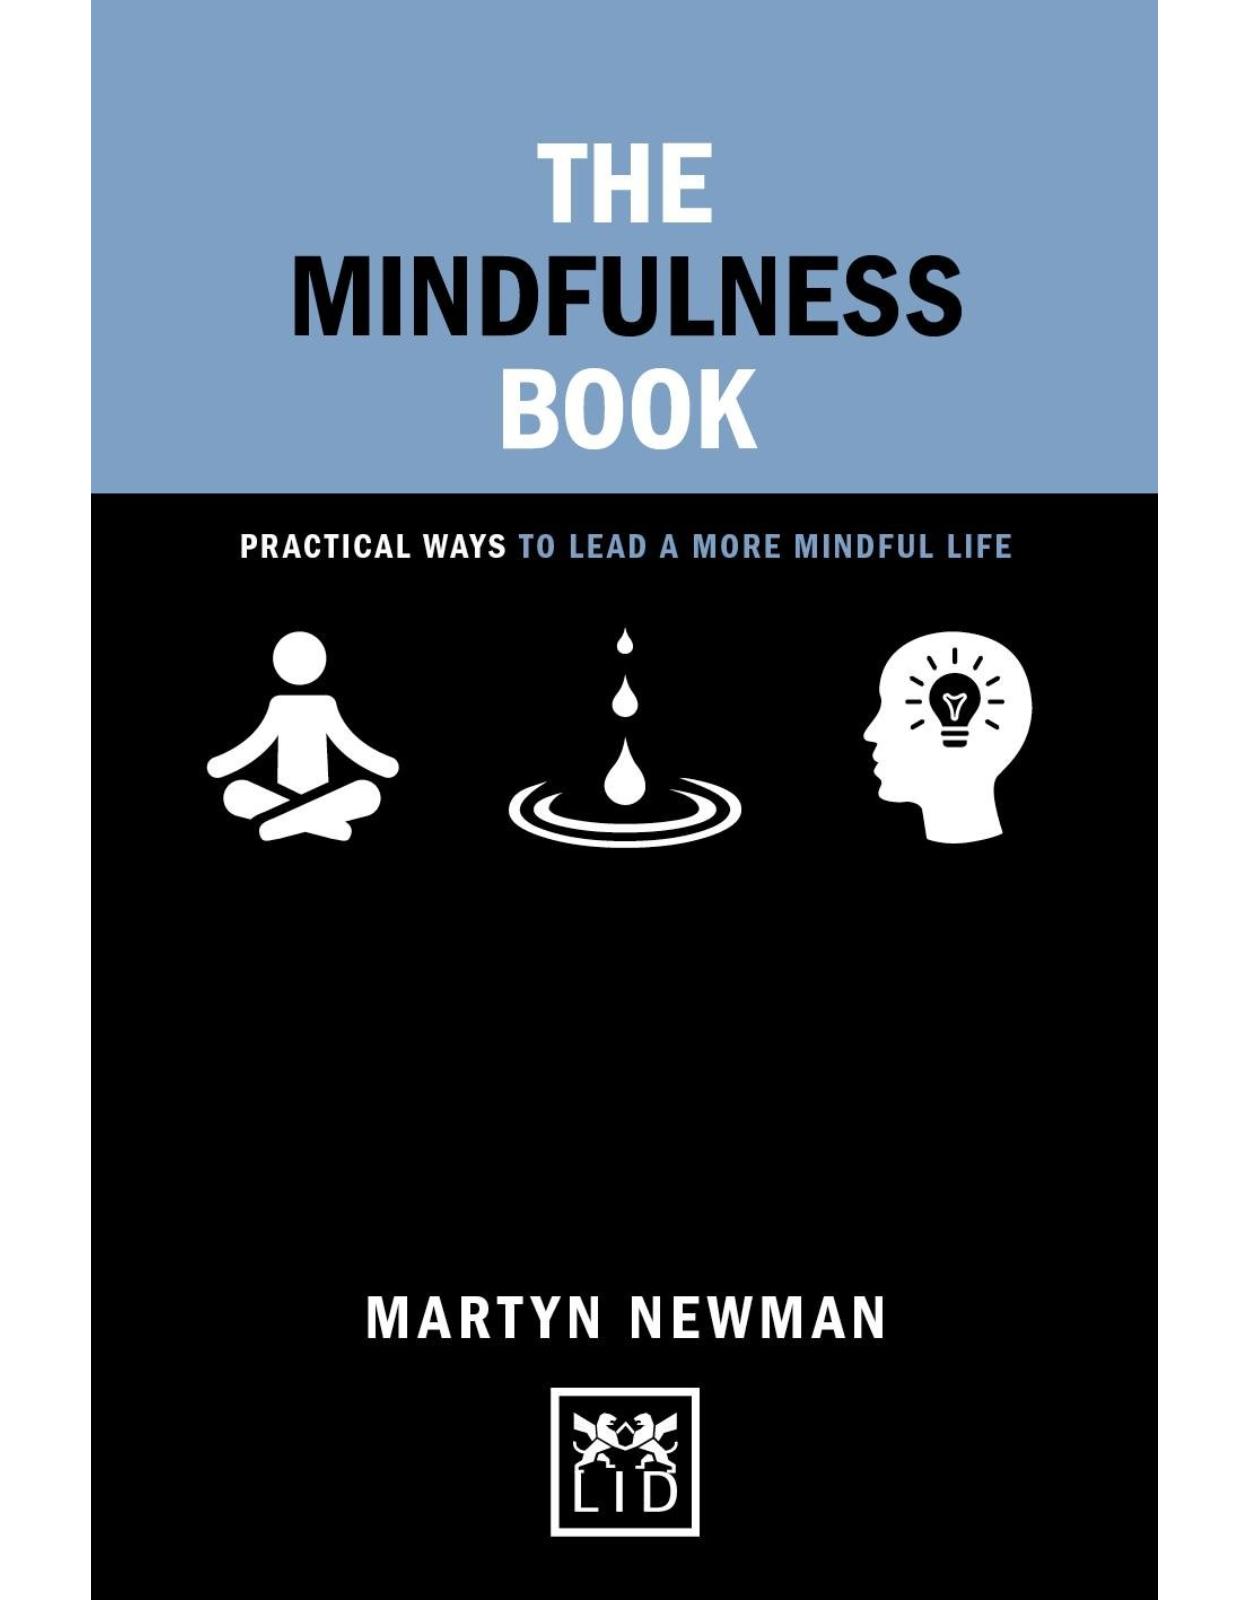 The Mindfulness Book: Practical ways to lead a more mindful life